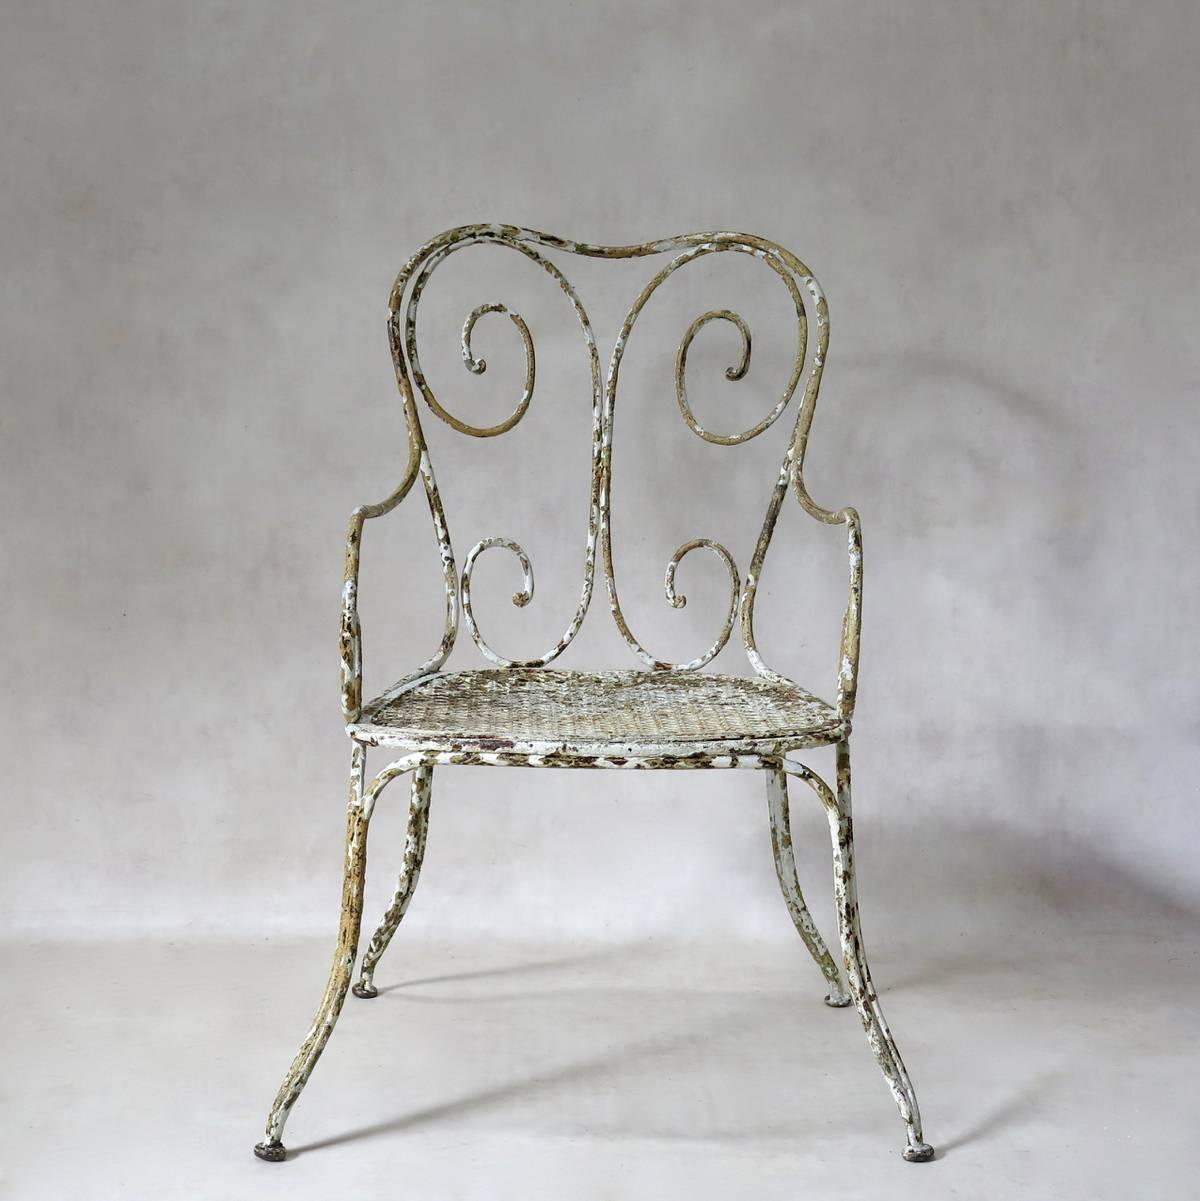 Very elegant, unusually wide, painted wrought iron garden chair. Sturdy, heavy and beautiful. Yellow and white paints visible.